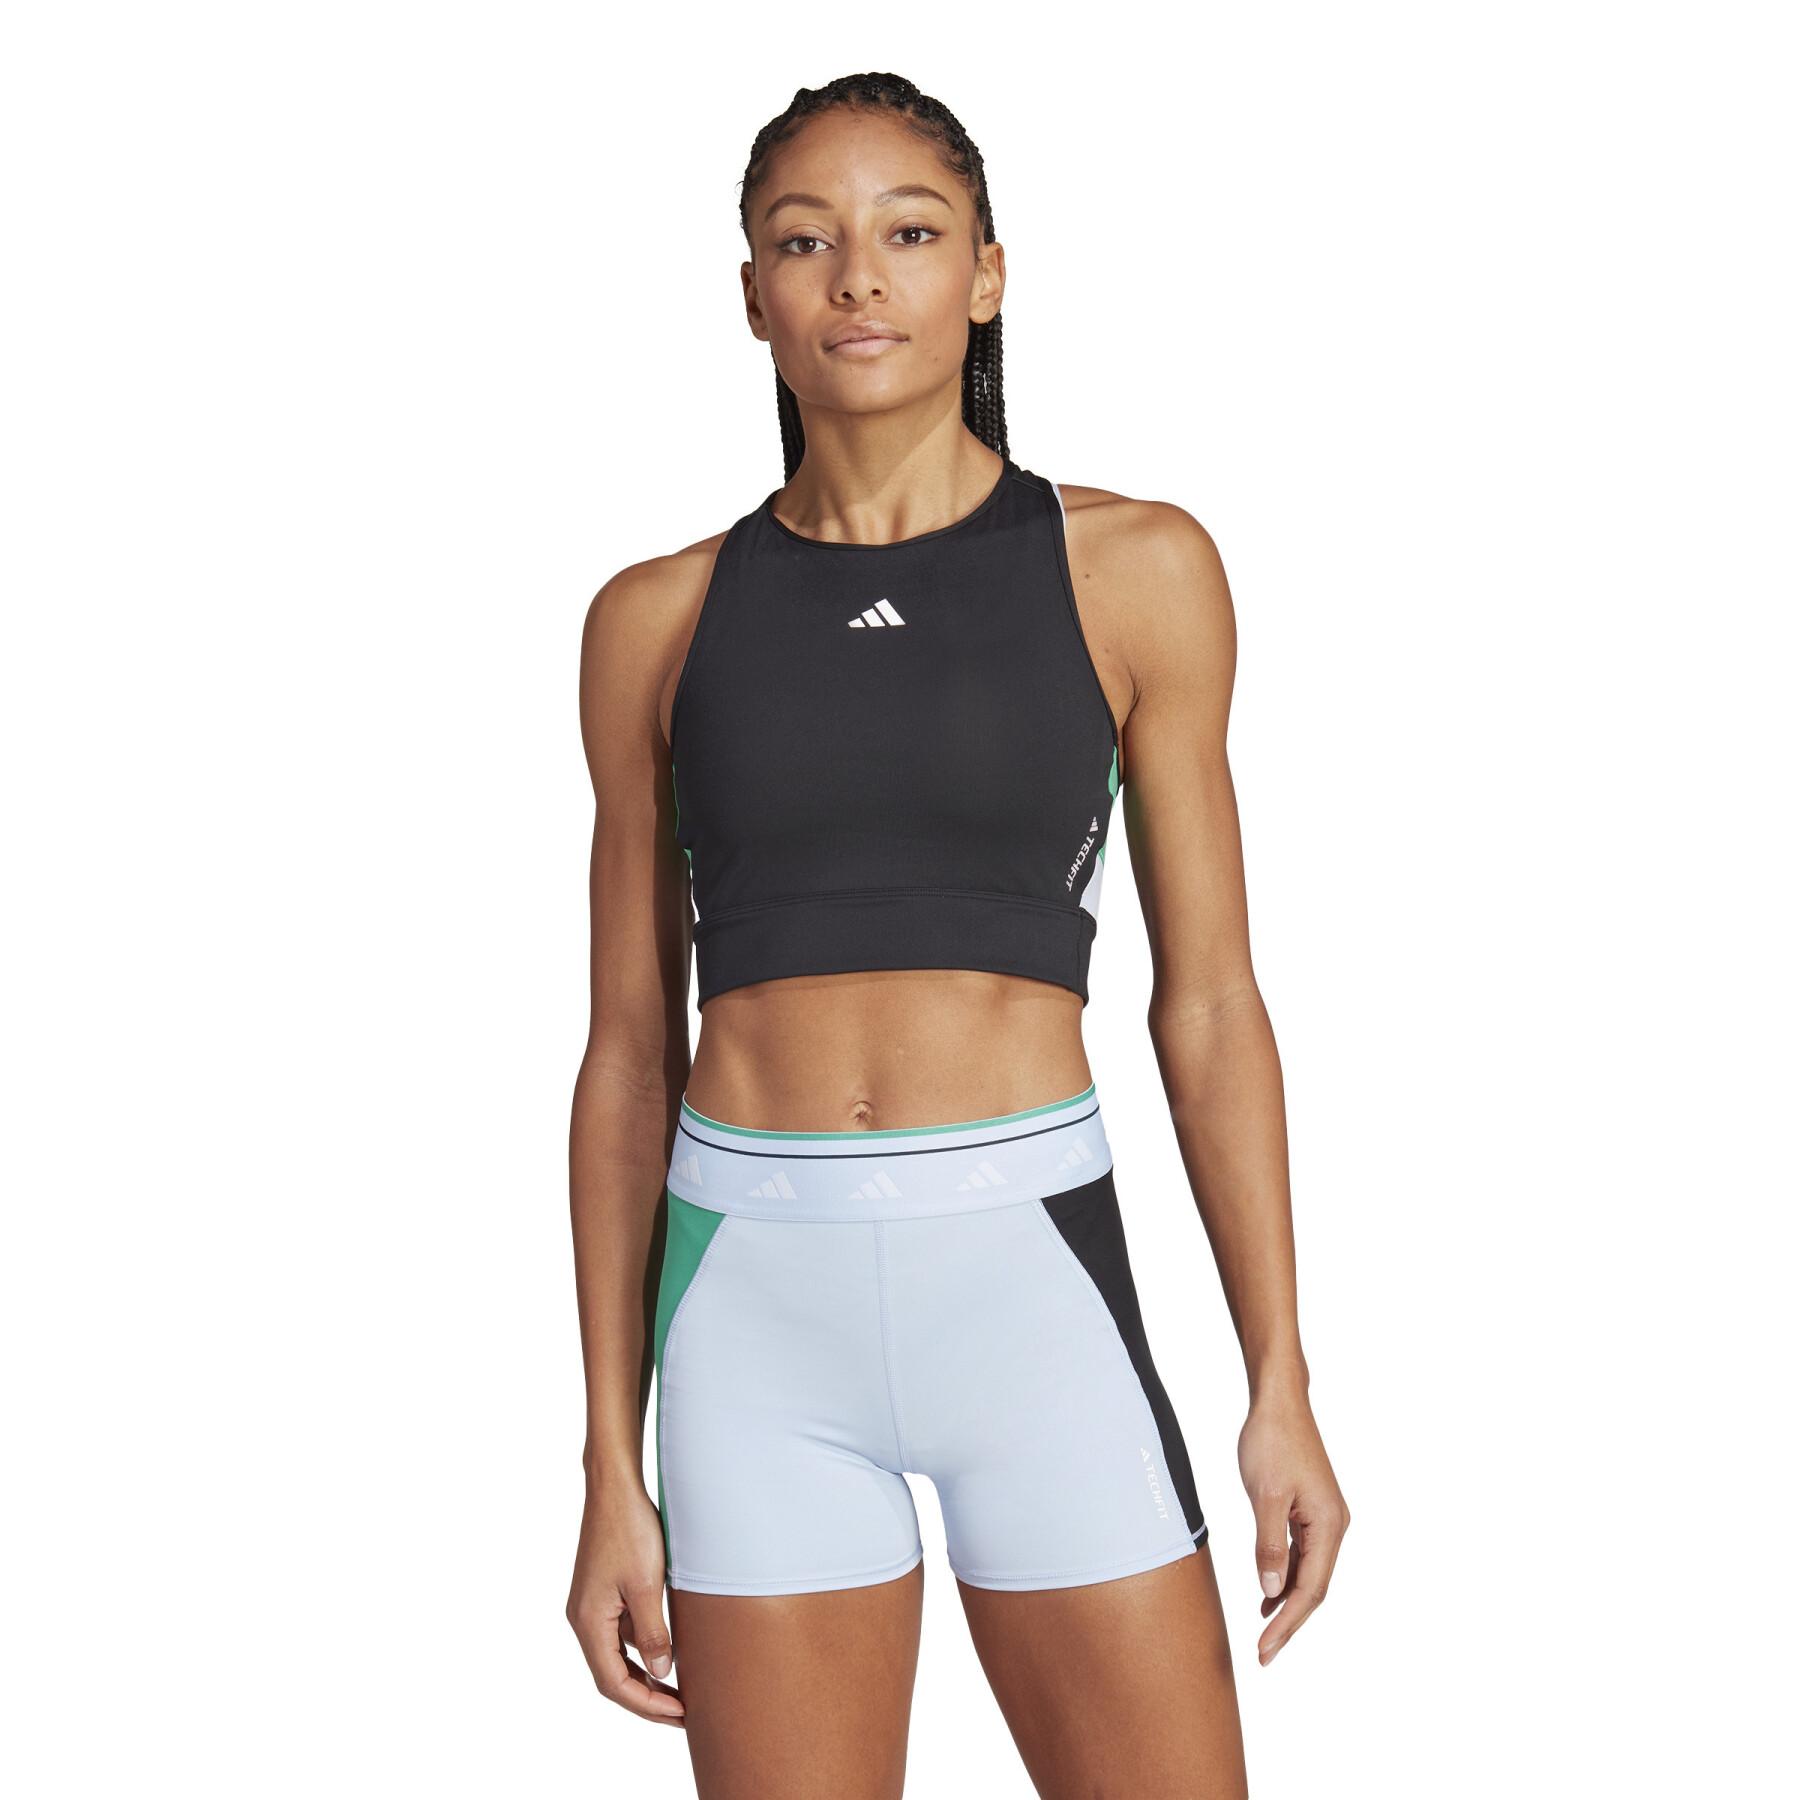 Tampo do tanque court femme adidas Techfit Colorblock